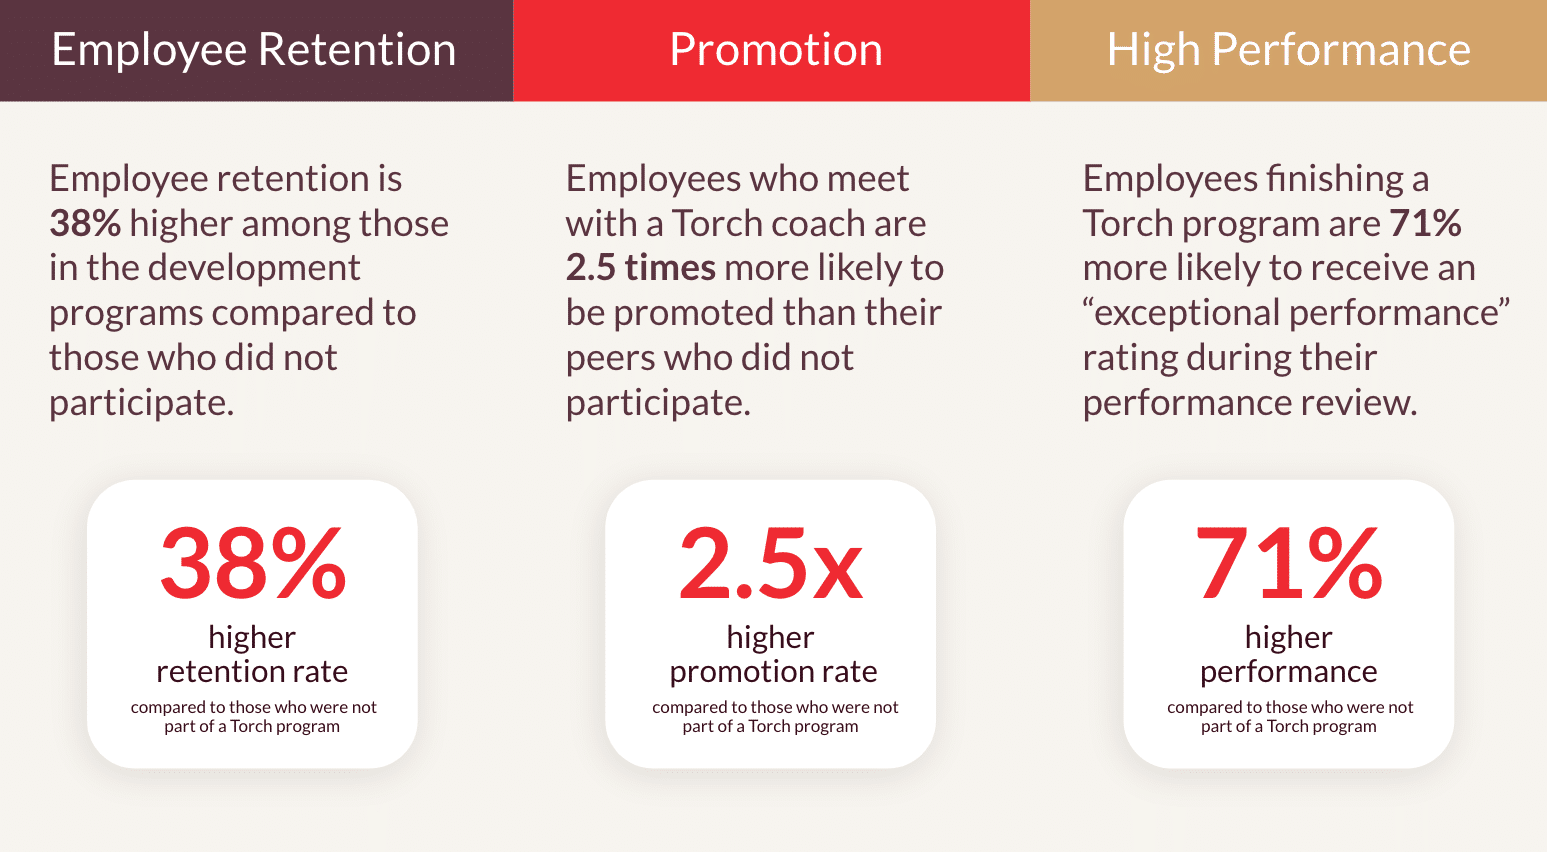 Higher results in Employee Retention, Promotion, and High Performance